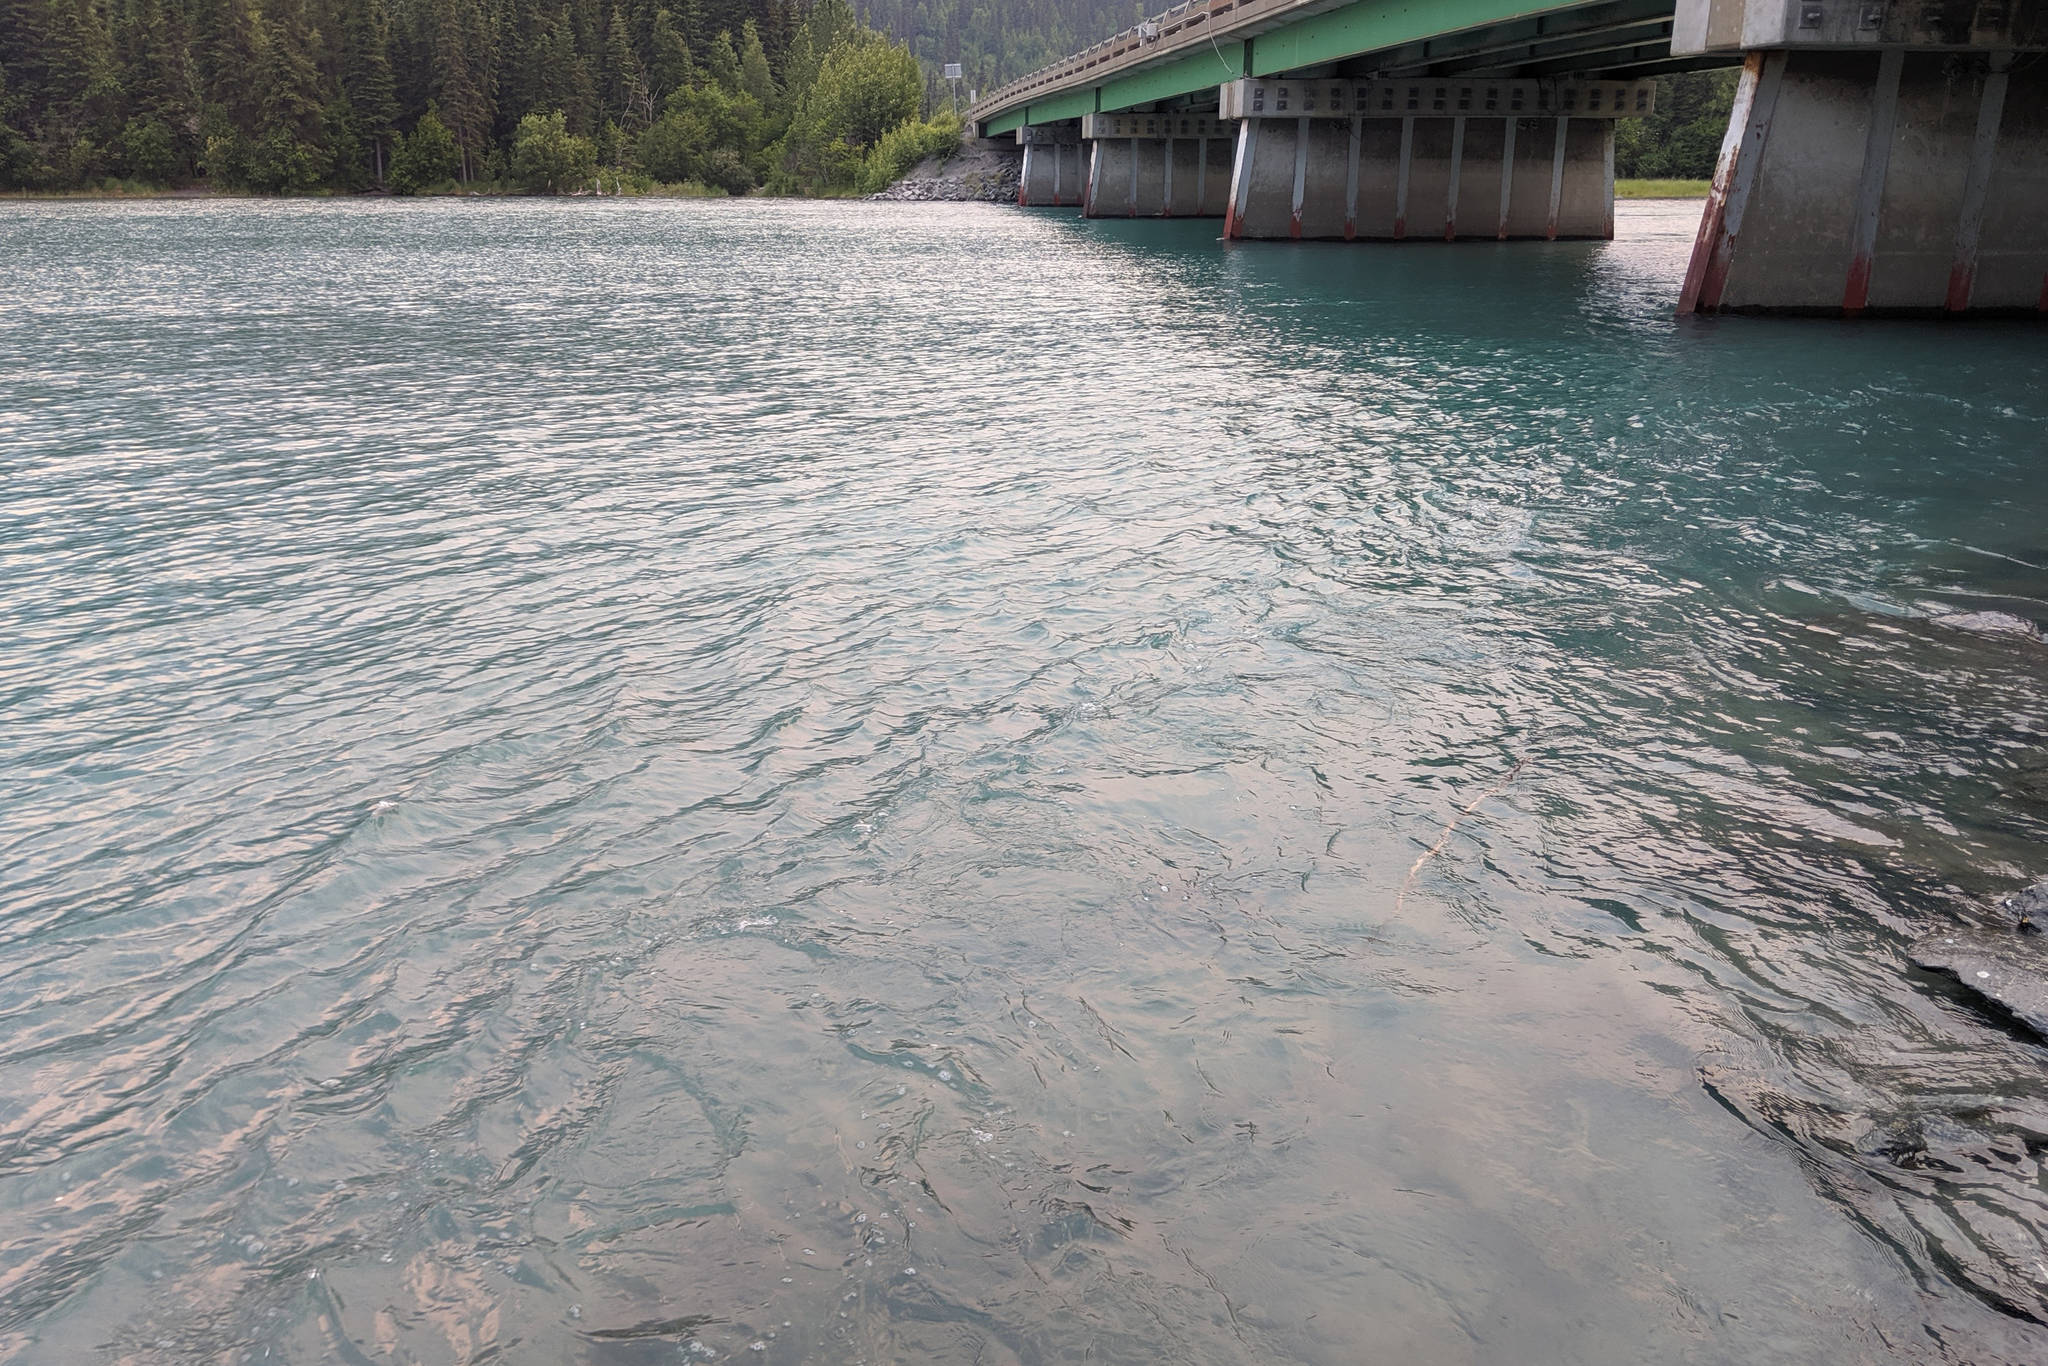 The Kenai River in Cooper Landing, Alaska, is photographed on Sunday, June 23, 2019. (Photo by Erin Thompson/Peninsula Clarion)